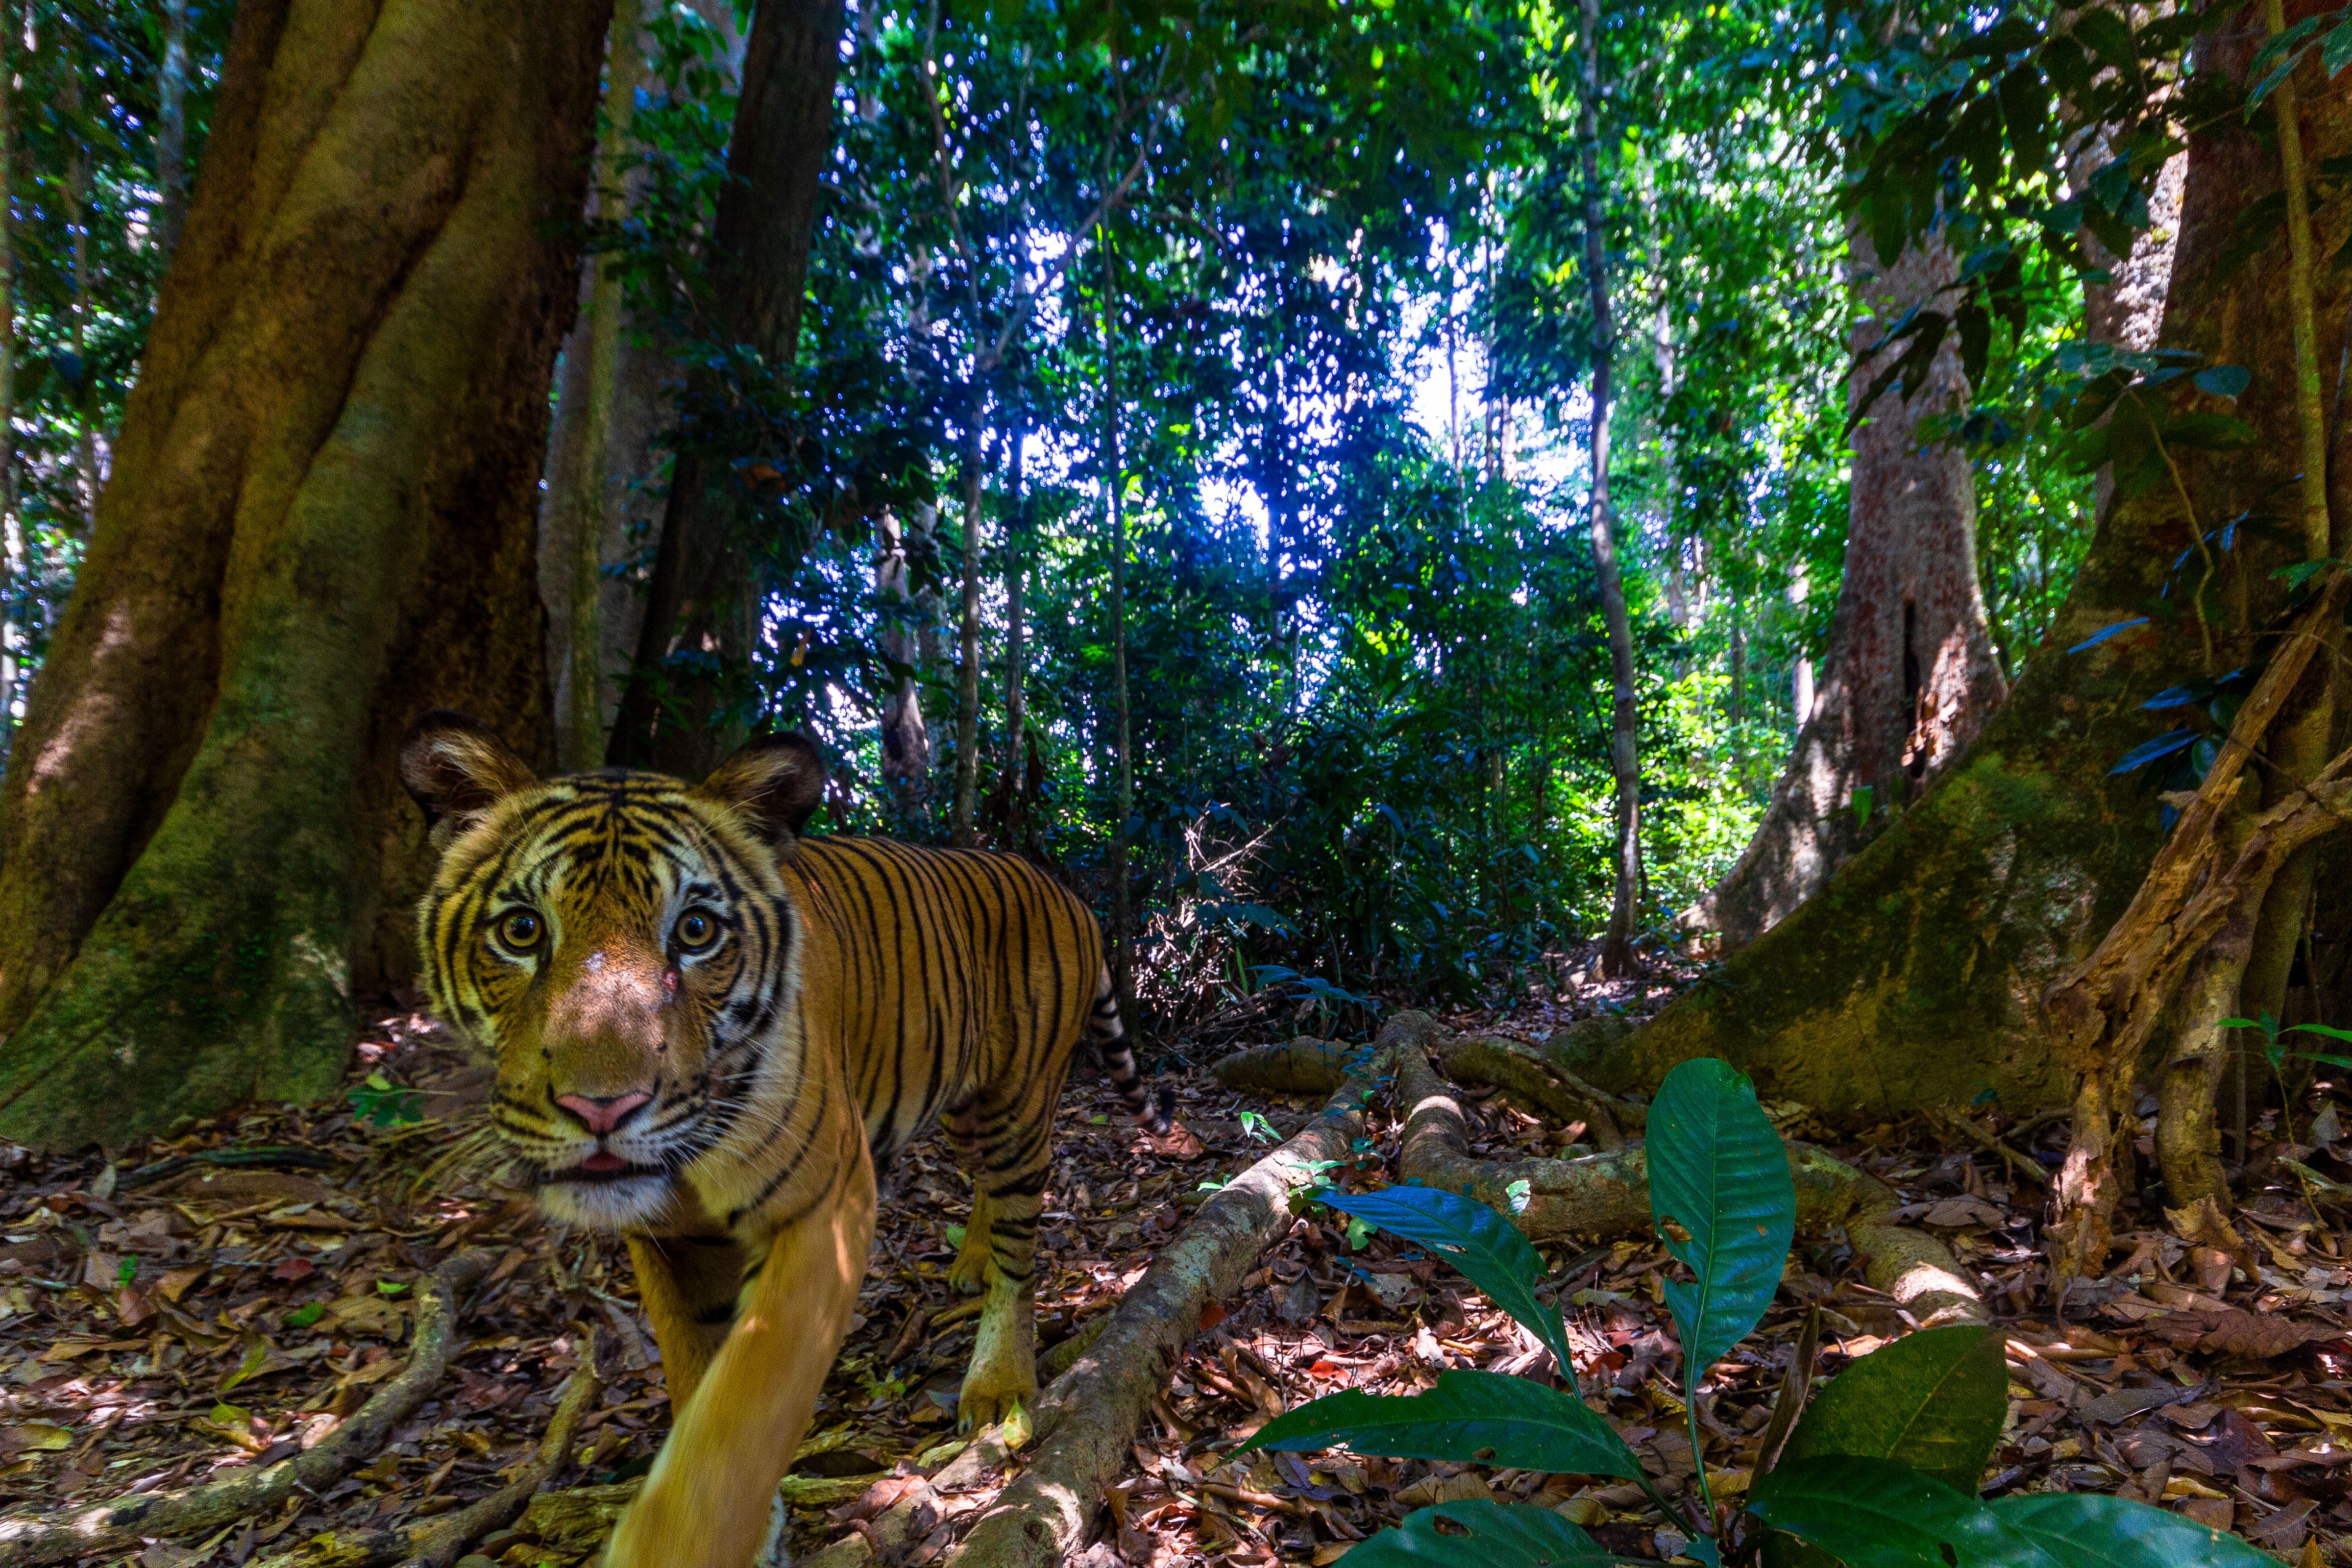 Malaysia's last tigers: Why this rare image is giving conservationists hope